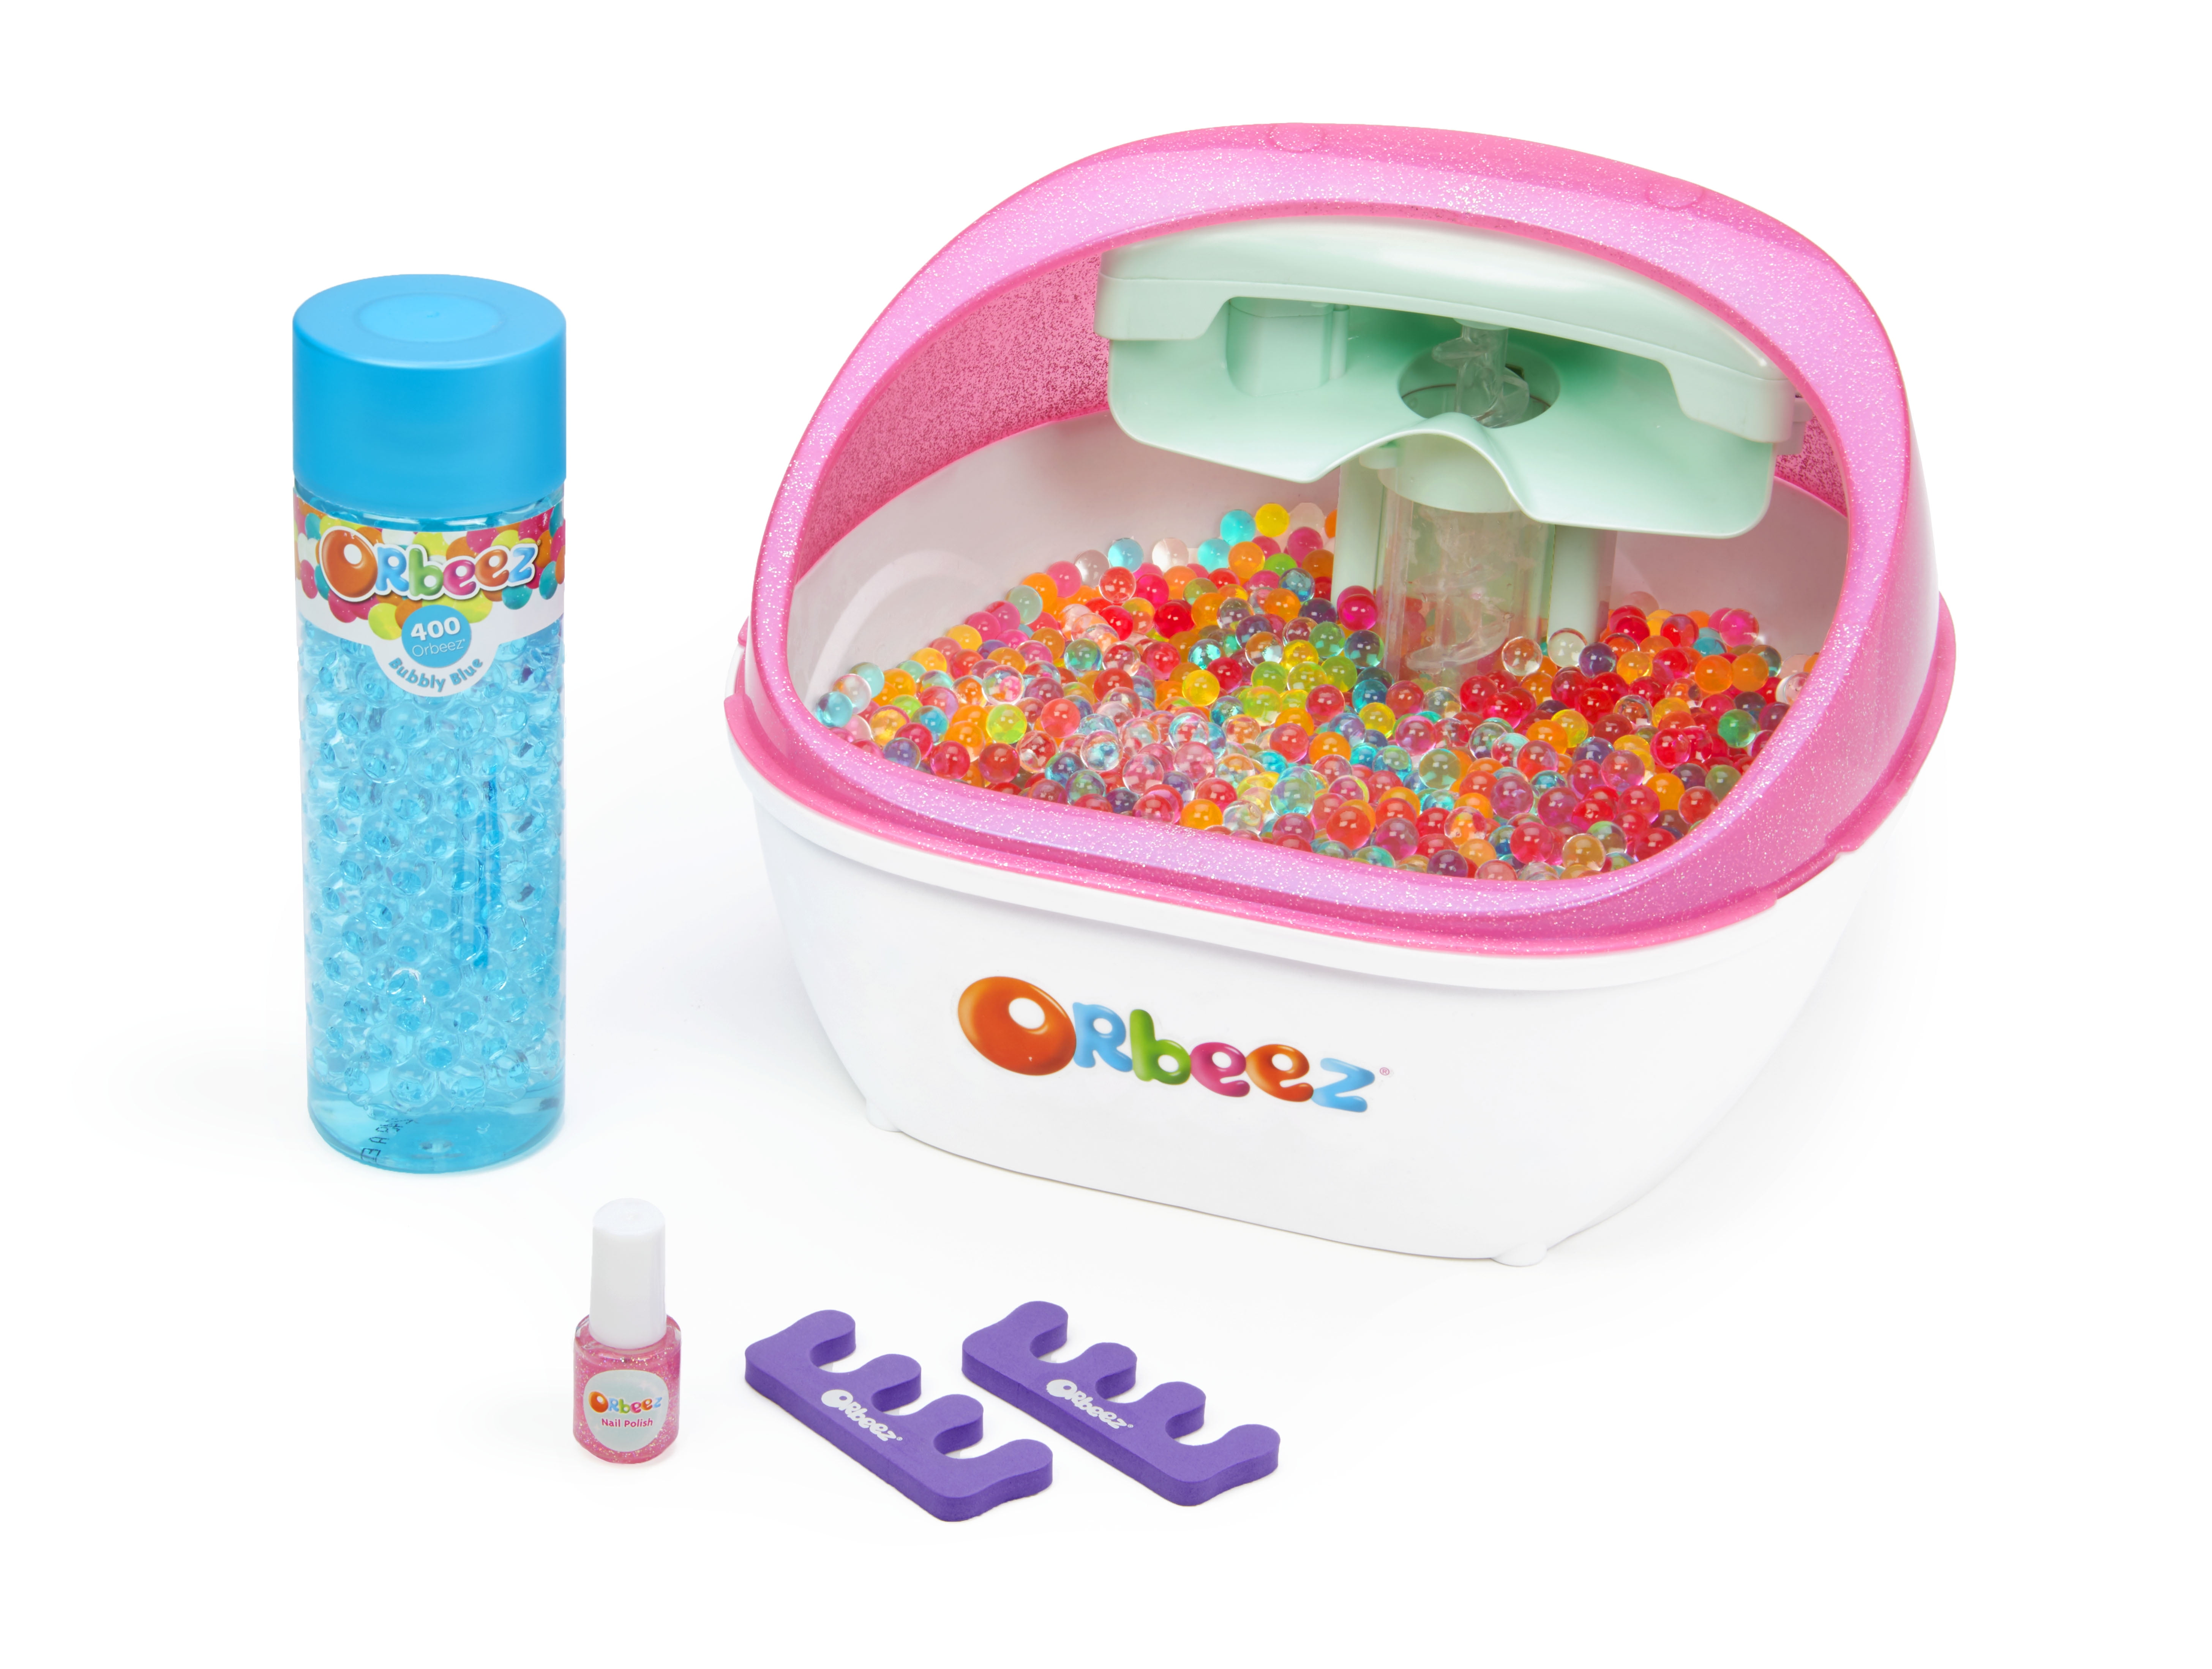 Orbeez, Soothing Foot Spa with 2,000 